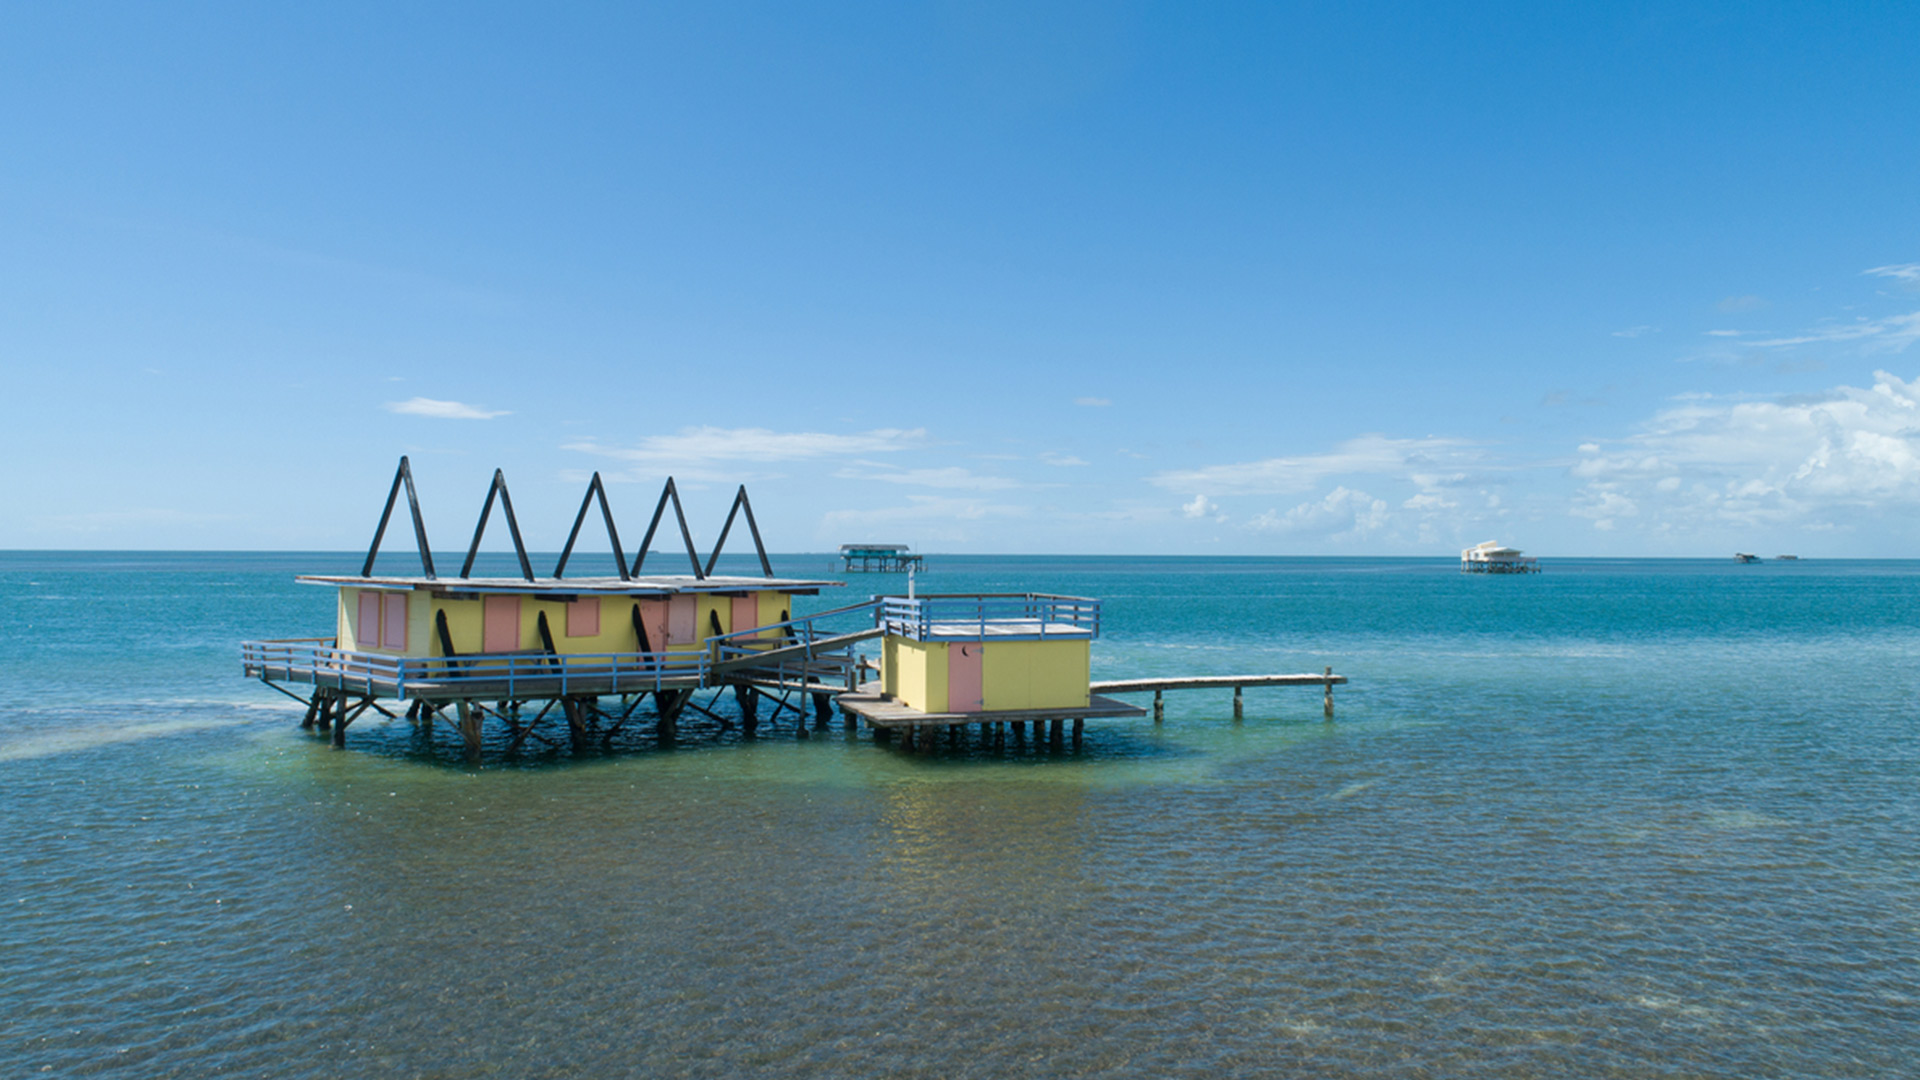 Sold Out - Stiltsville & Key Biscayne Sunset Cruise with Dr. George